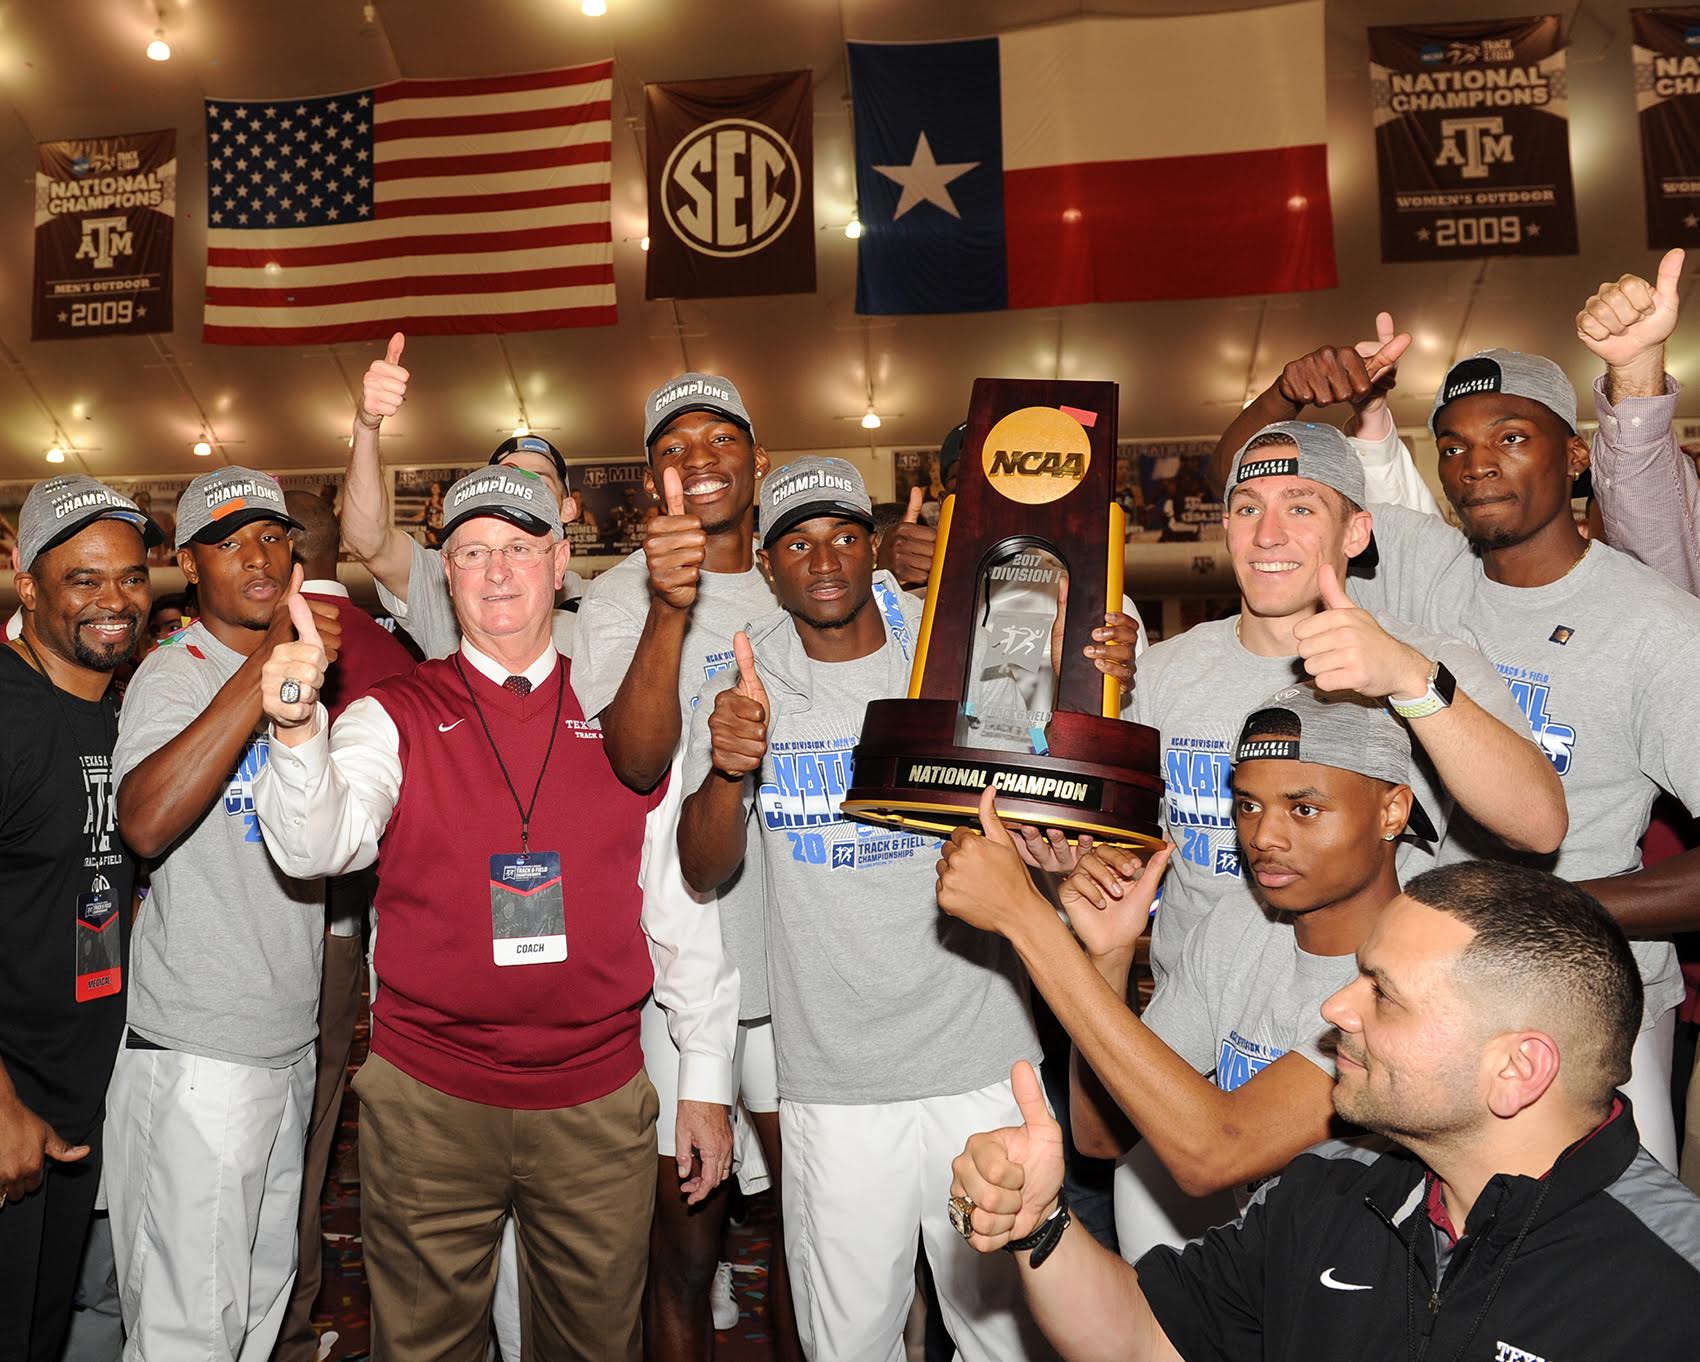 Texas A&M wins its first national indoor championship by half a point